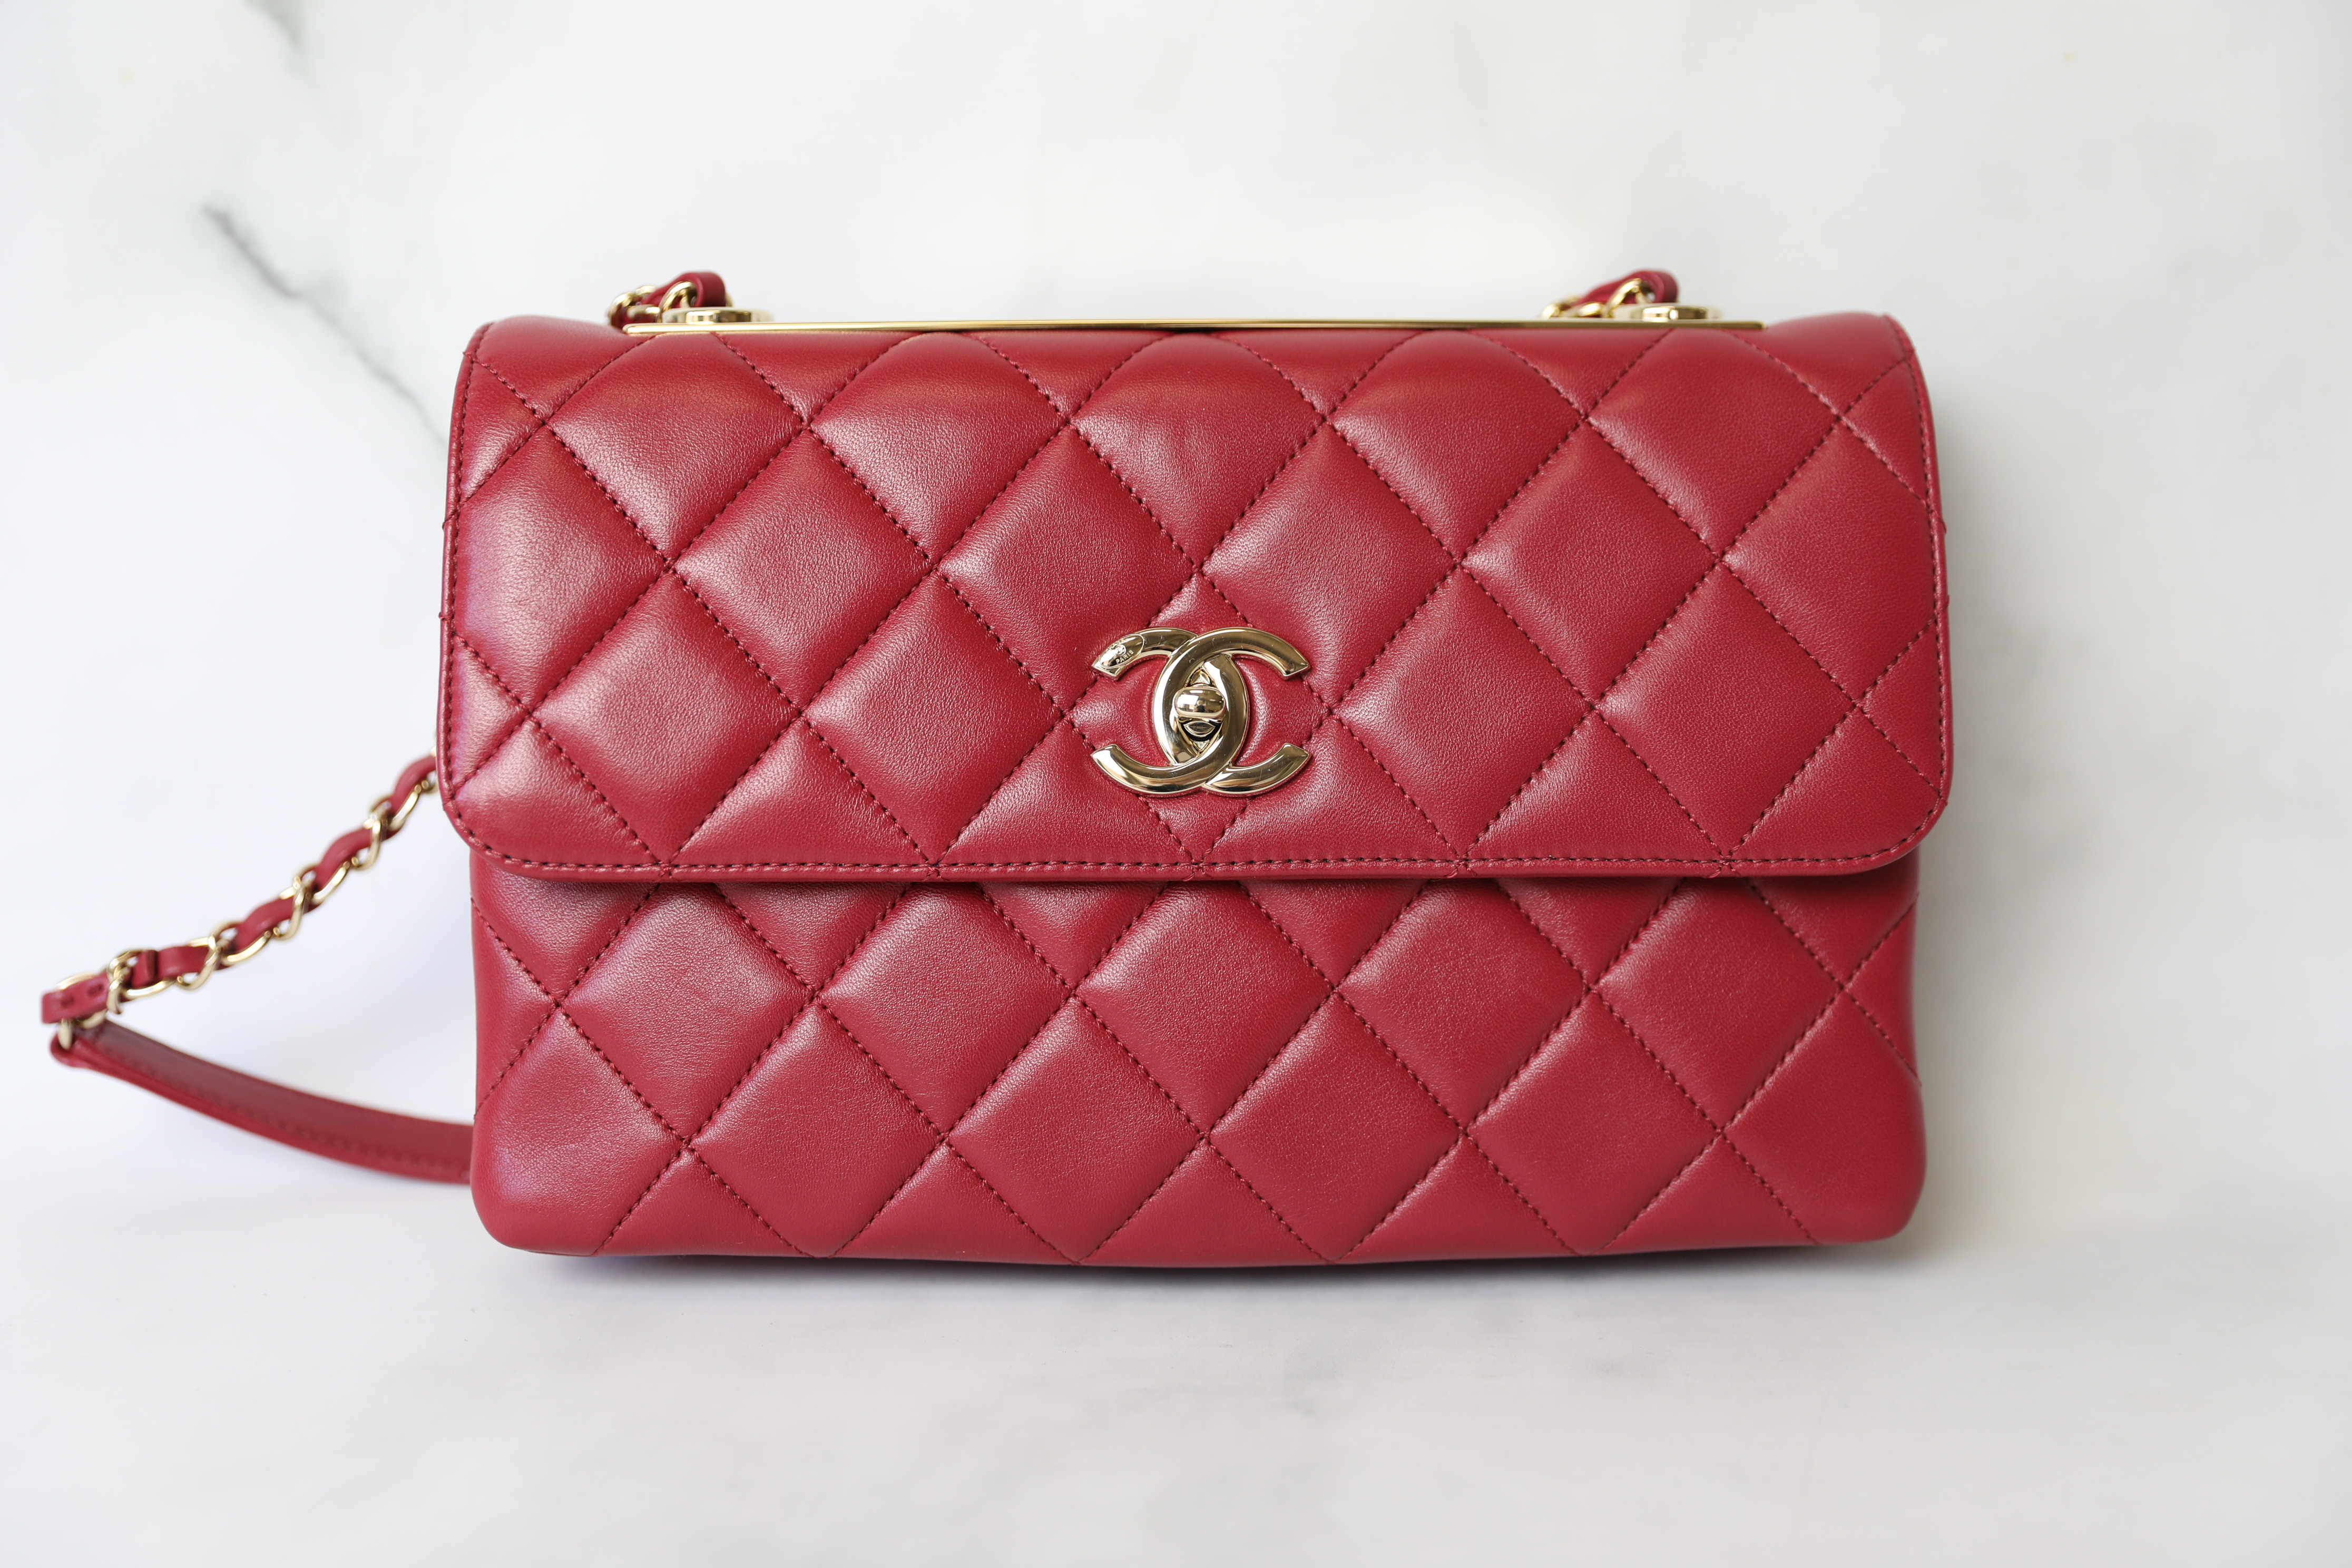 Chanel Trendy Flap, Red Lambskin with Gold Hardware, Preowned in